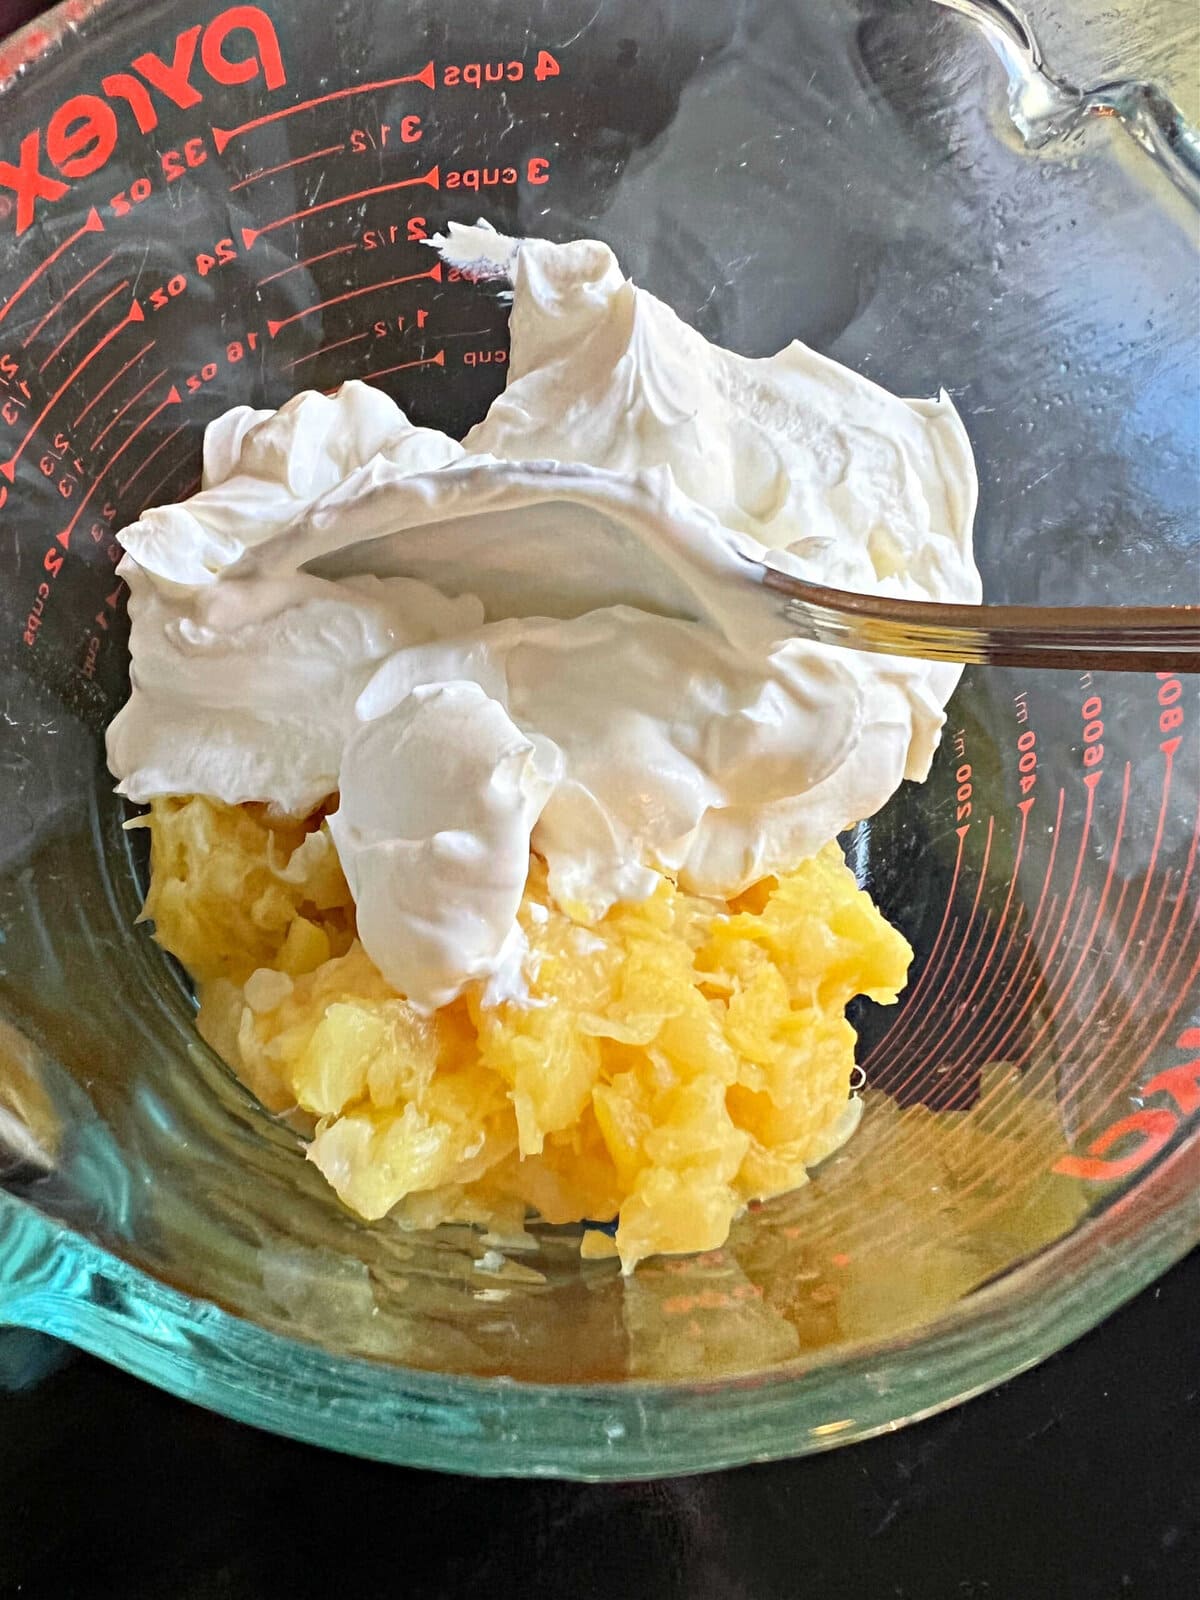 combining pineapple and sour cream.